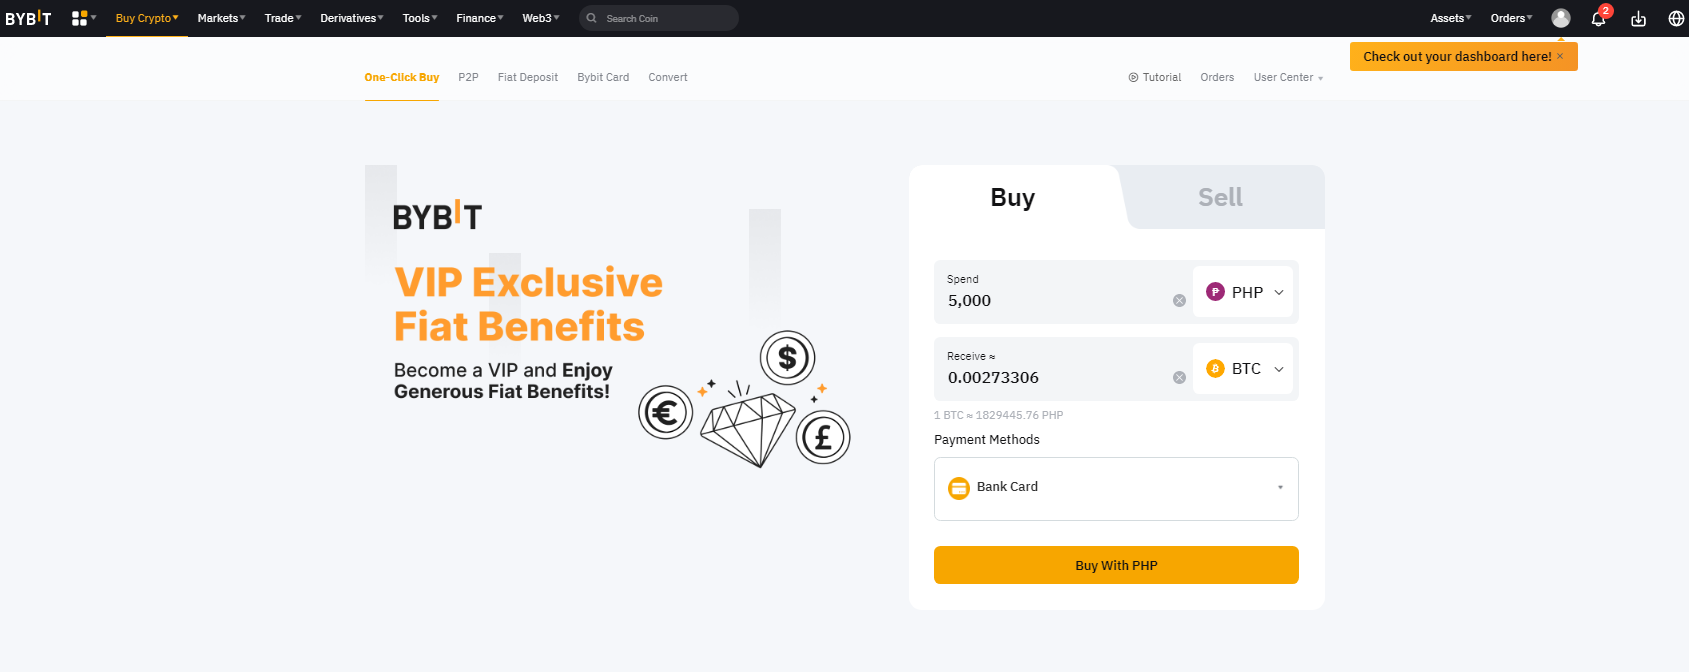 Buying Crypto with PHP on ByBit